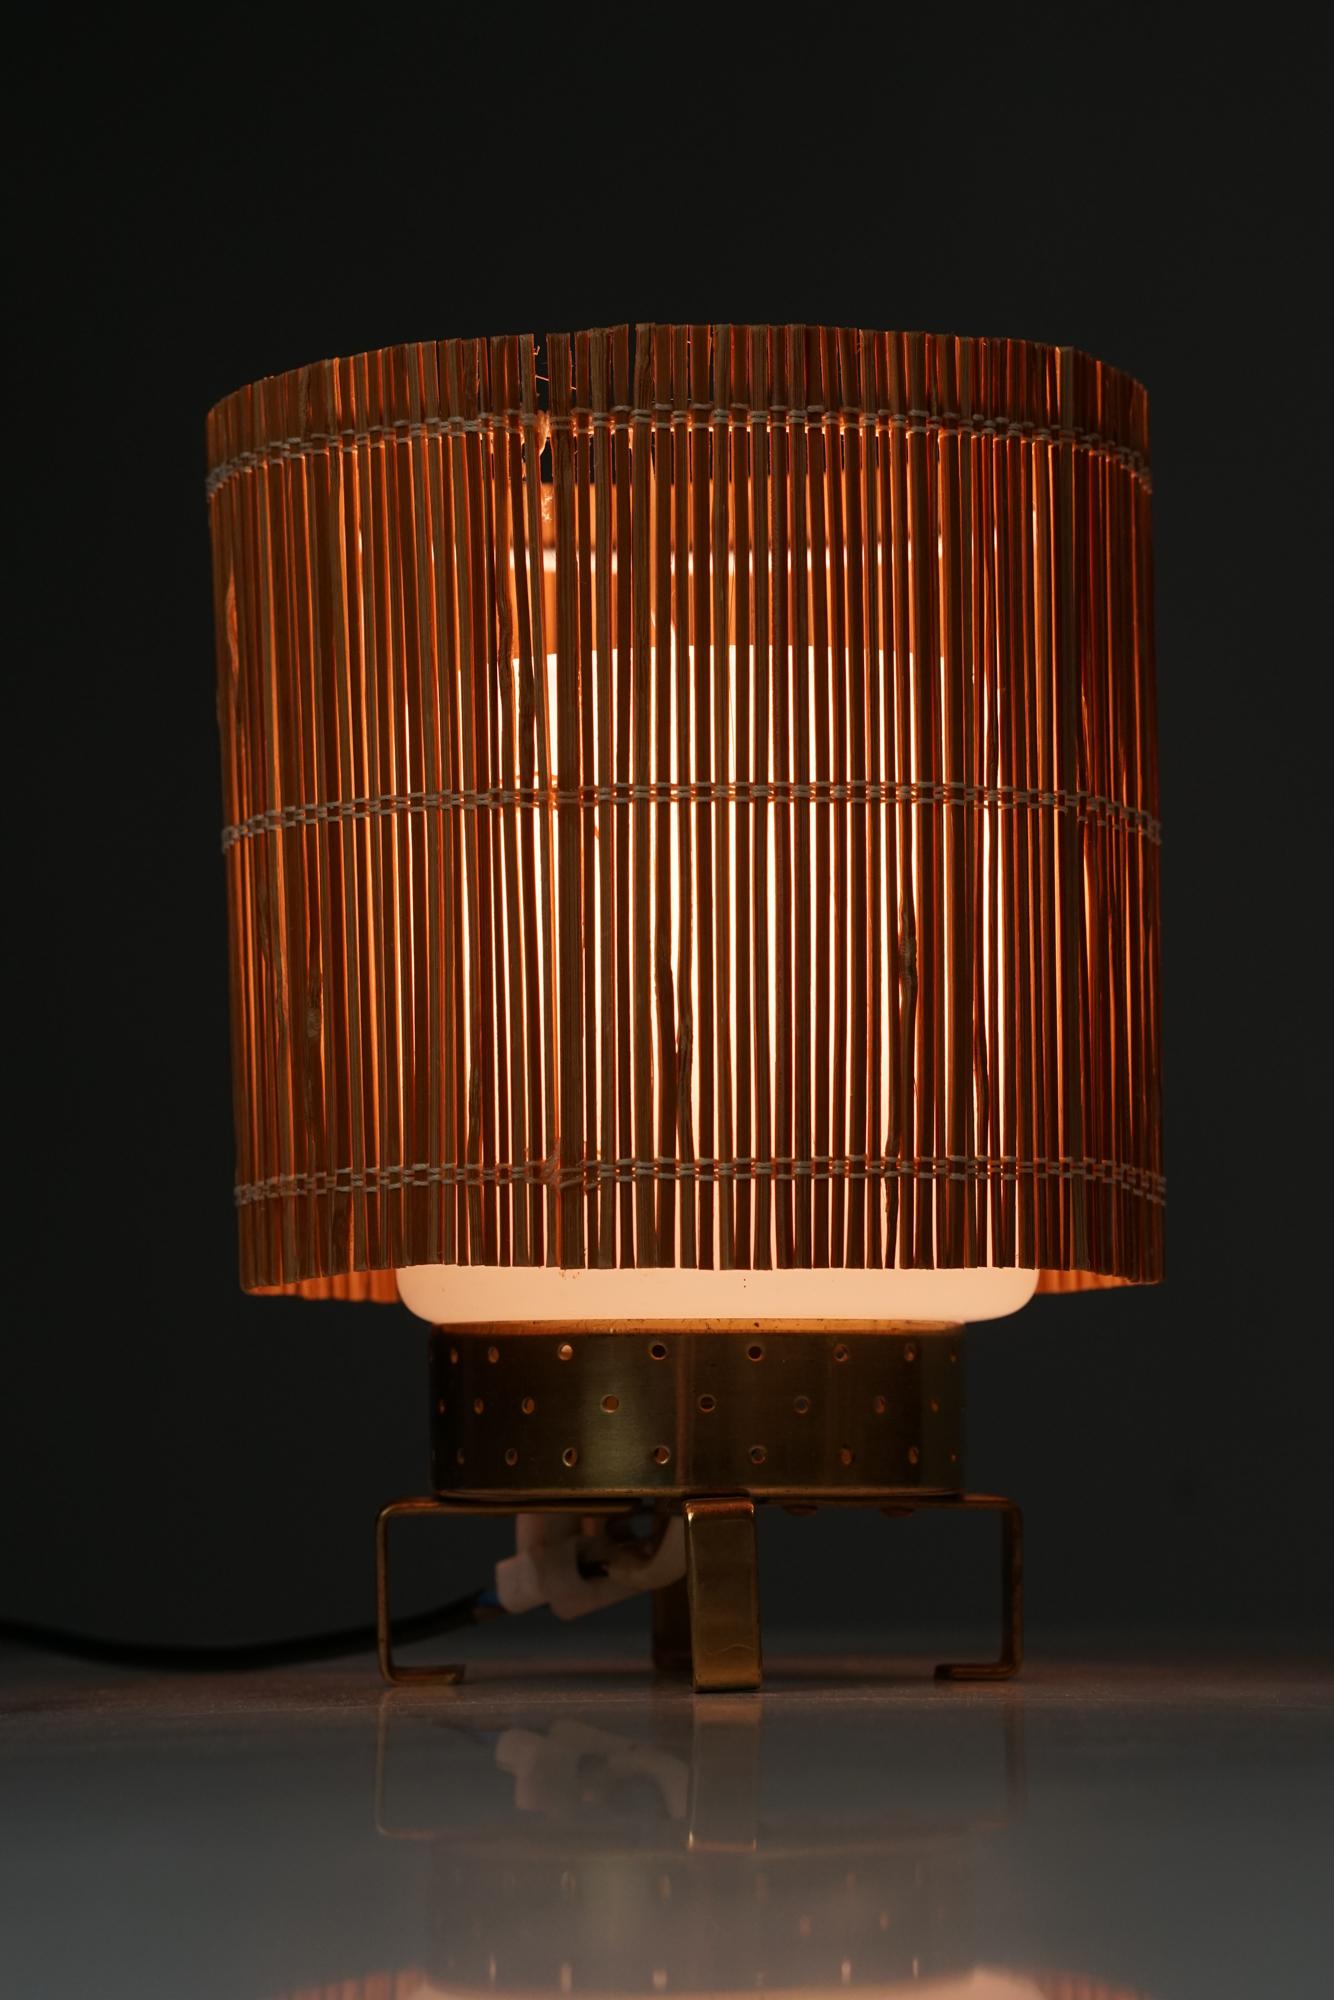 Minimalistic model 61071/1 Idman Oy table lamp from the 1950s. Brass, opaline glass shade with later wooden slat shade. Manufacturer's stamp. Good vintage condition, minor patina and wear consistent with age and use. 
Beautiful Scandinavian Modern